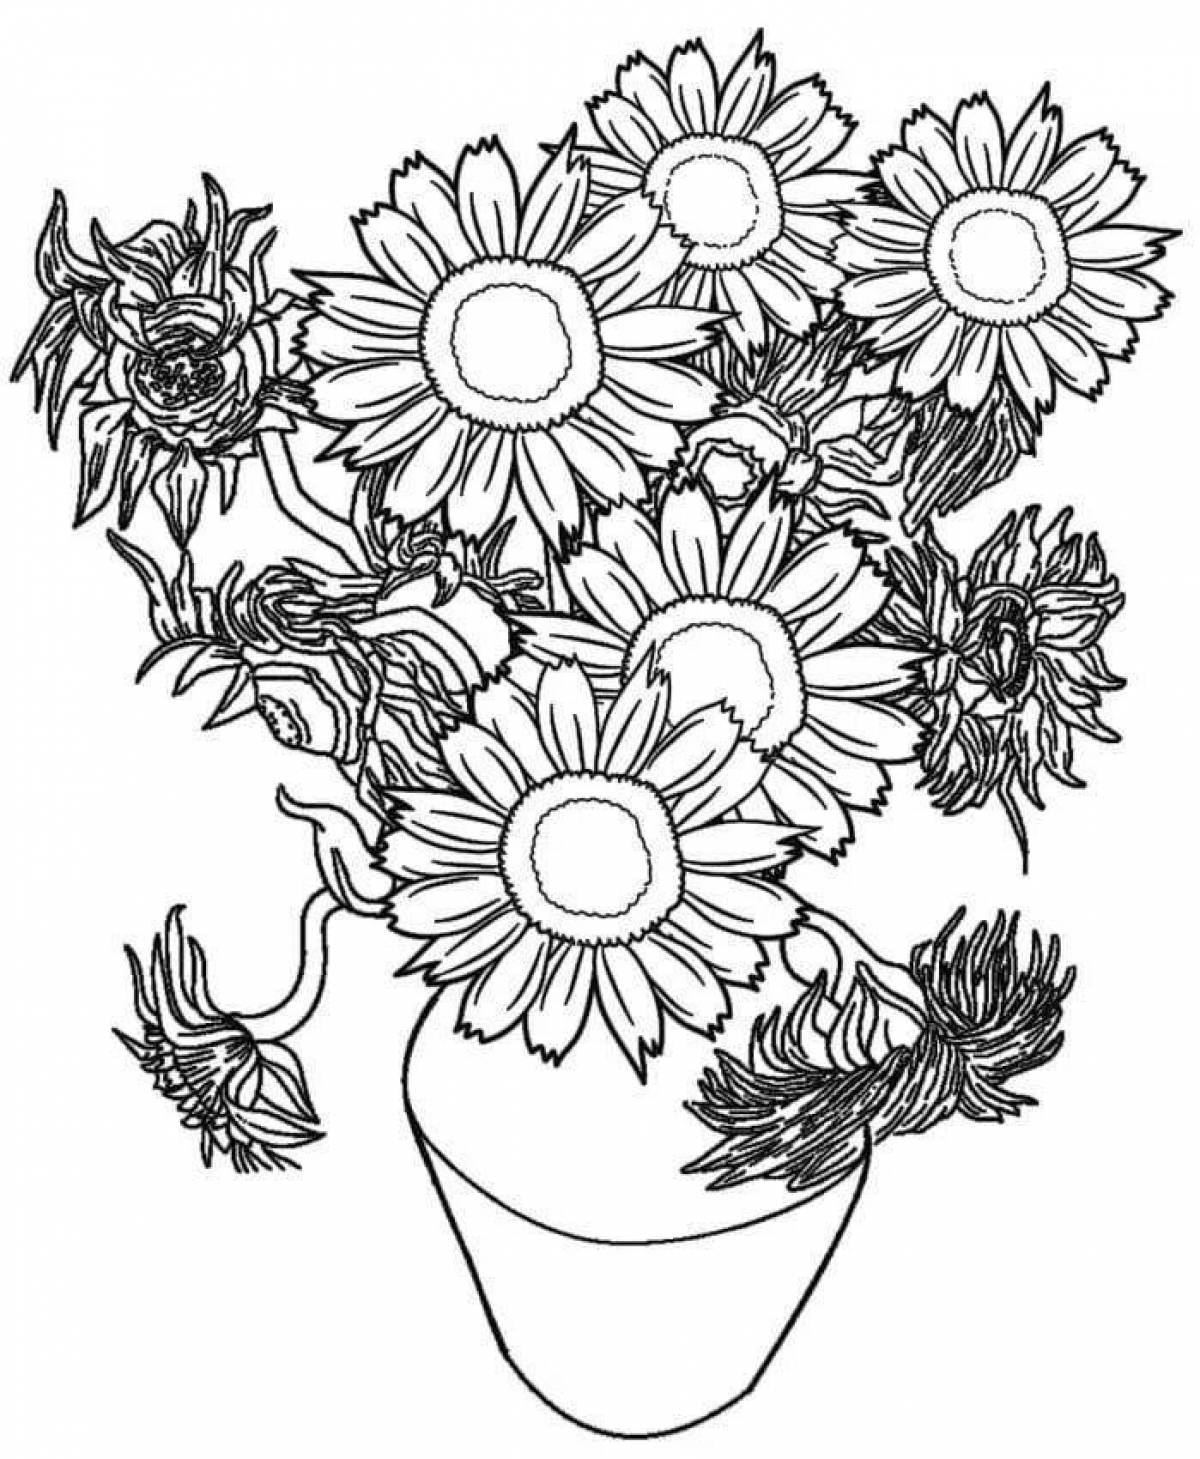 Coloring book charming bouquet of daisies